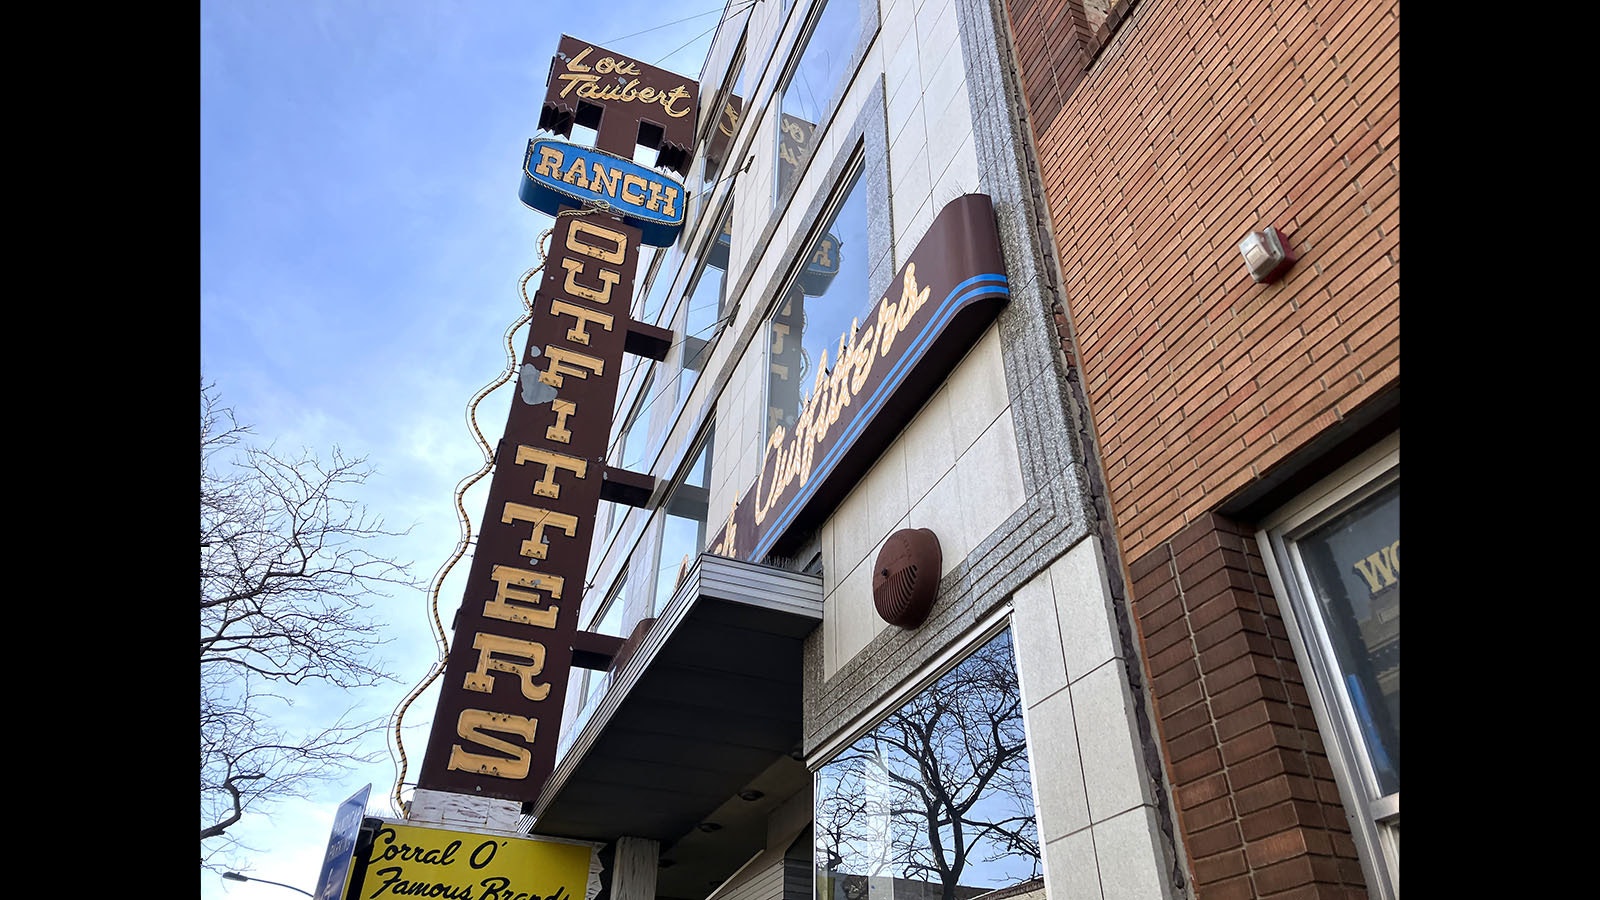 A classic neon sign advertises Lou Taubert Ranch Outfitters outside its four-story building in downtown Casper.